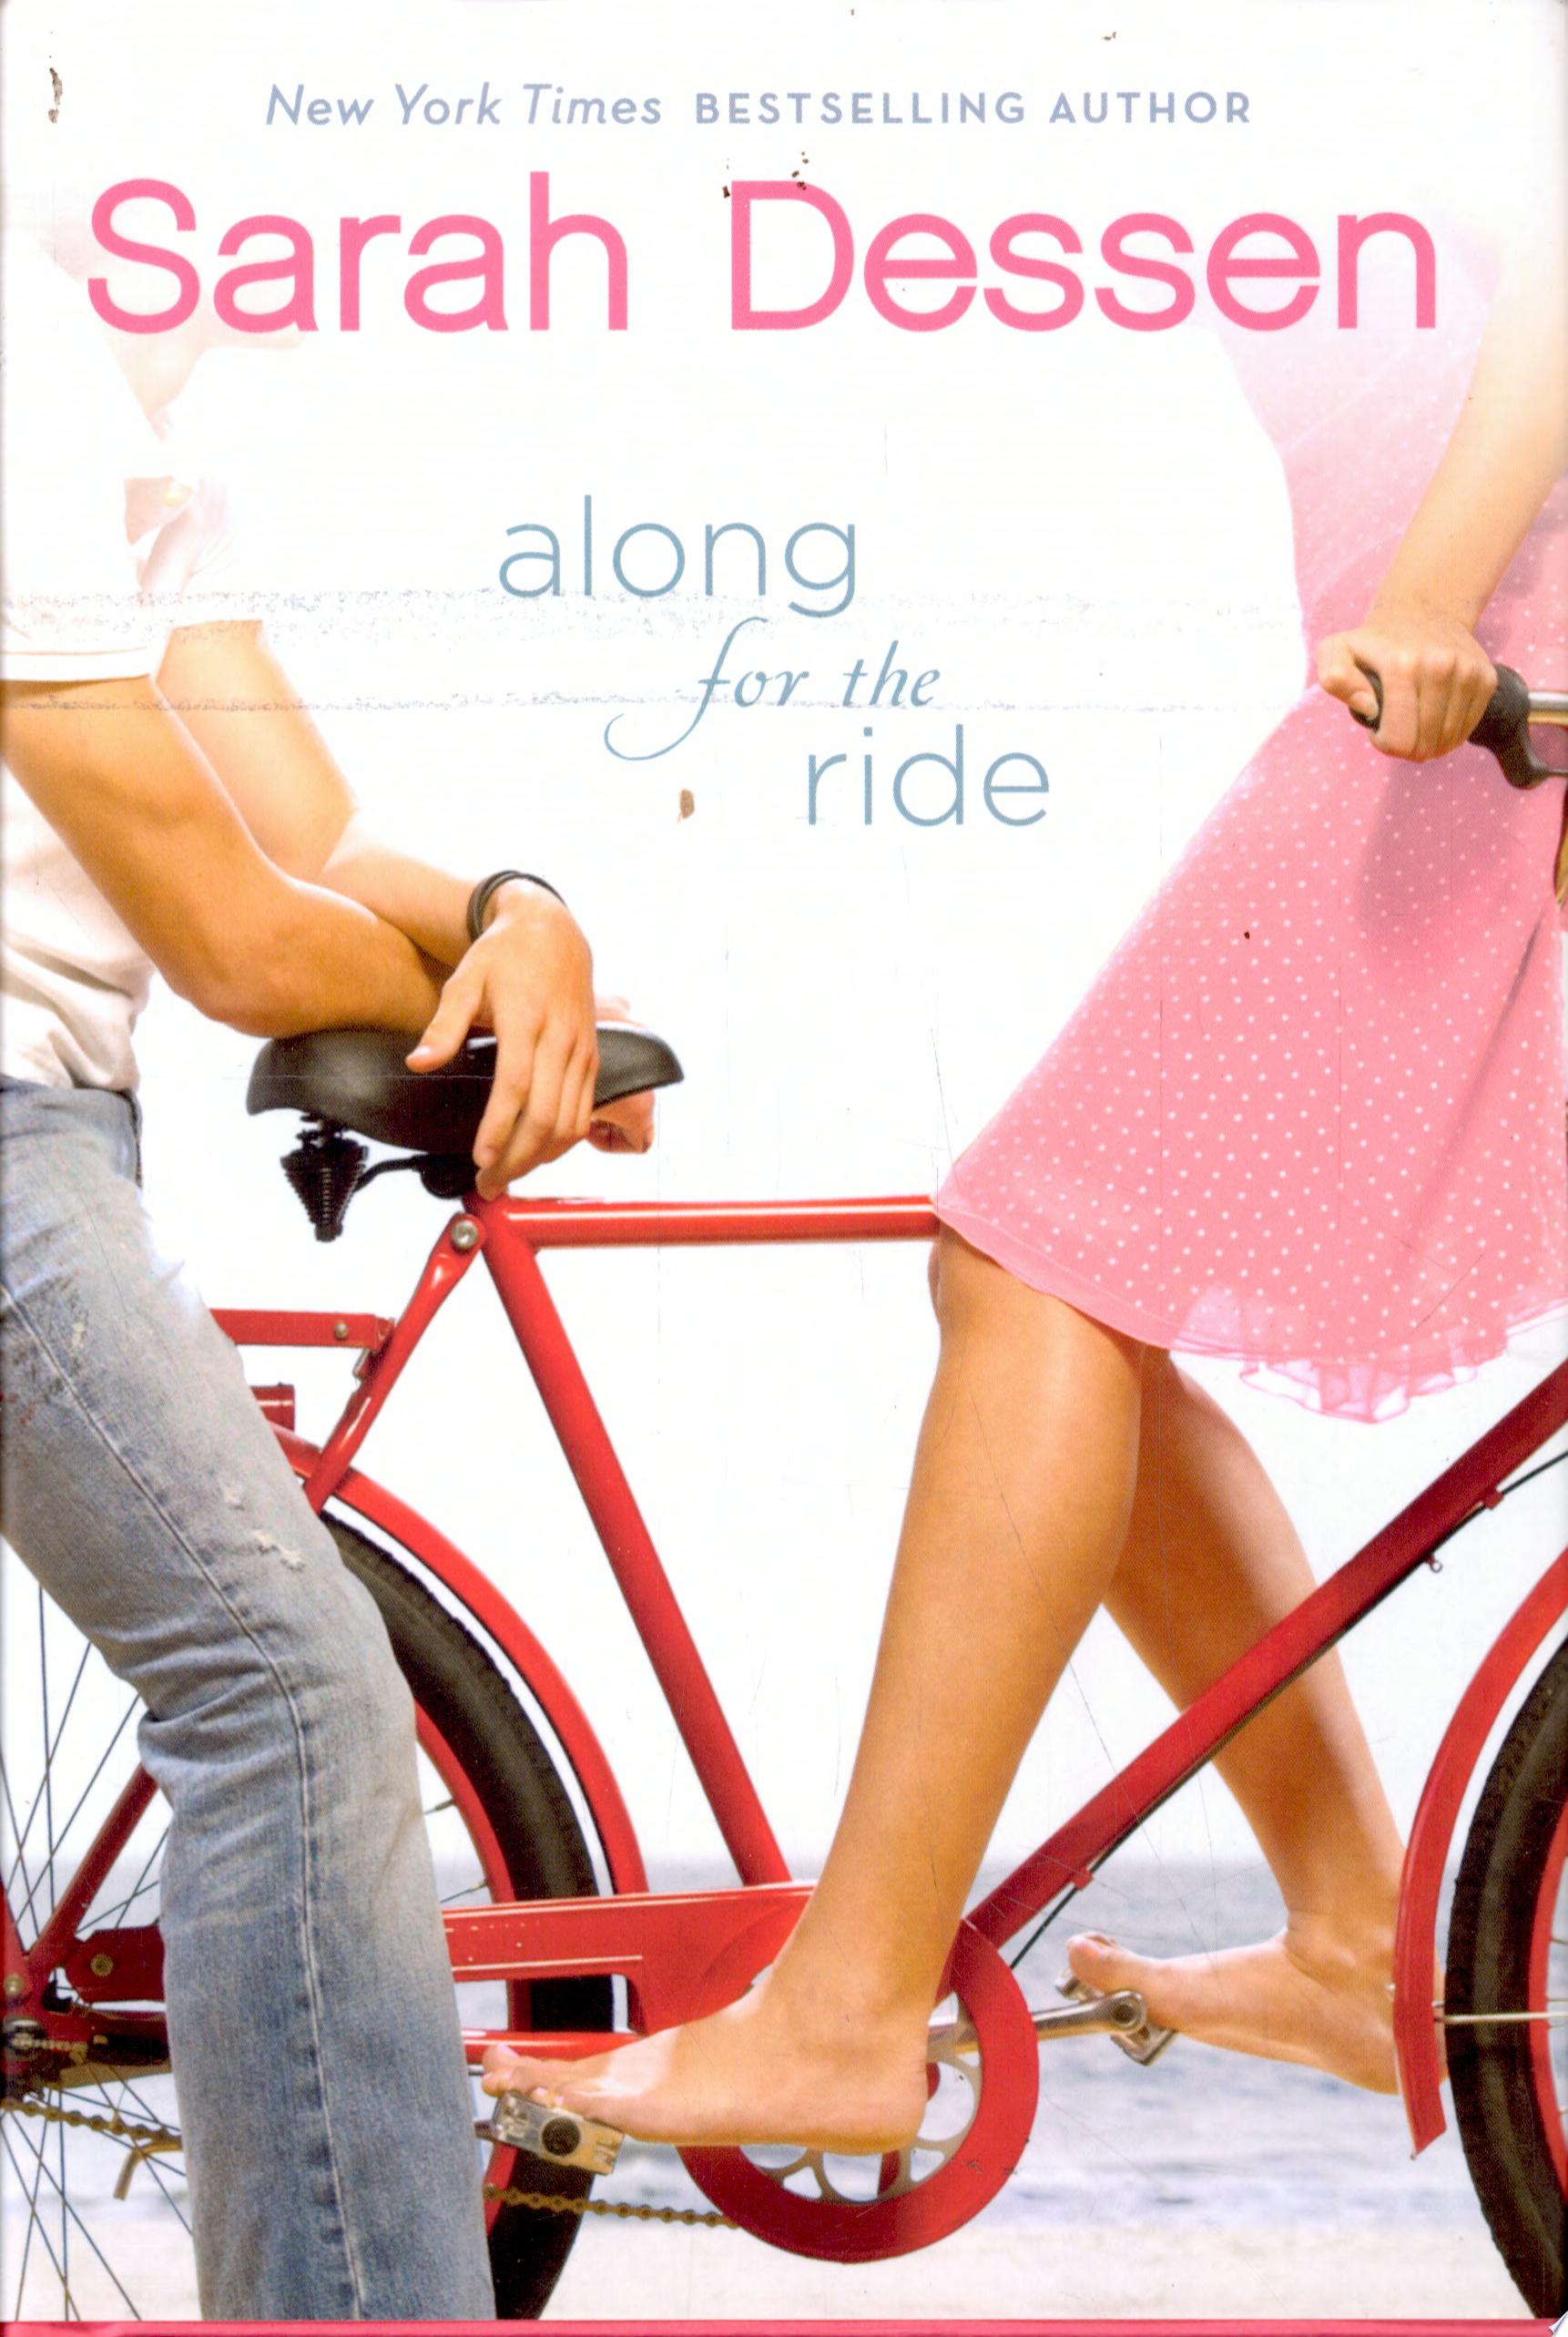 Image for "Along for the Ride"